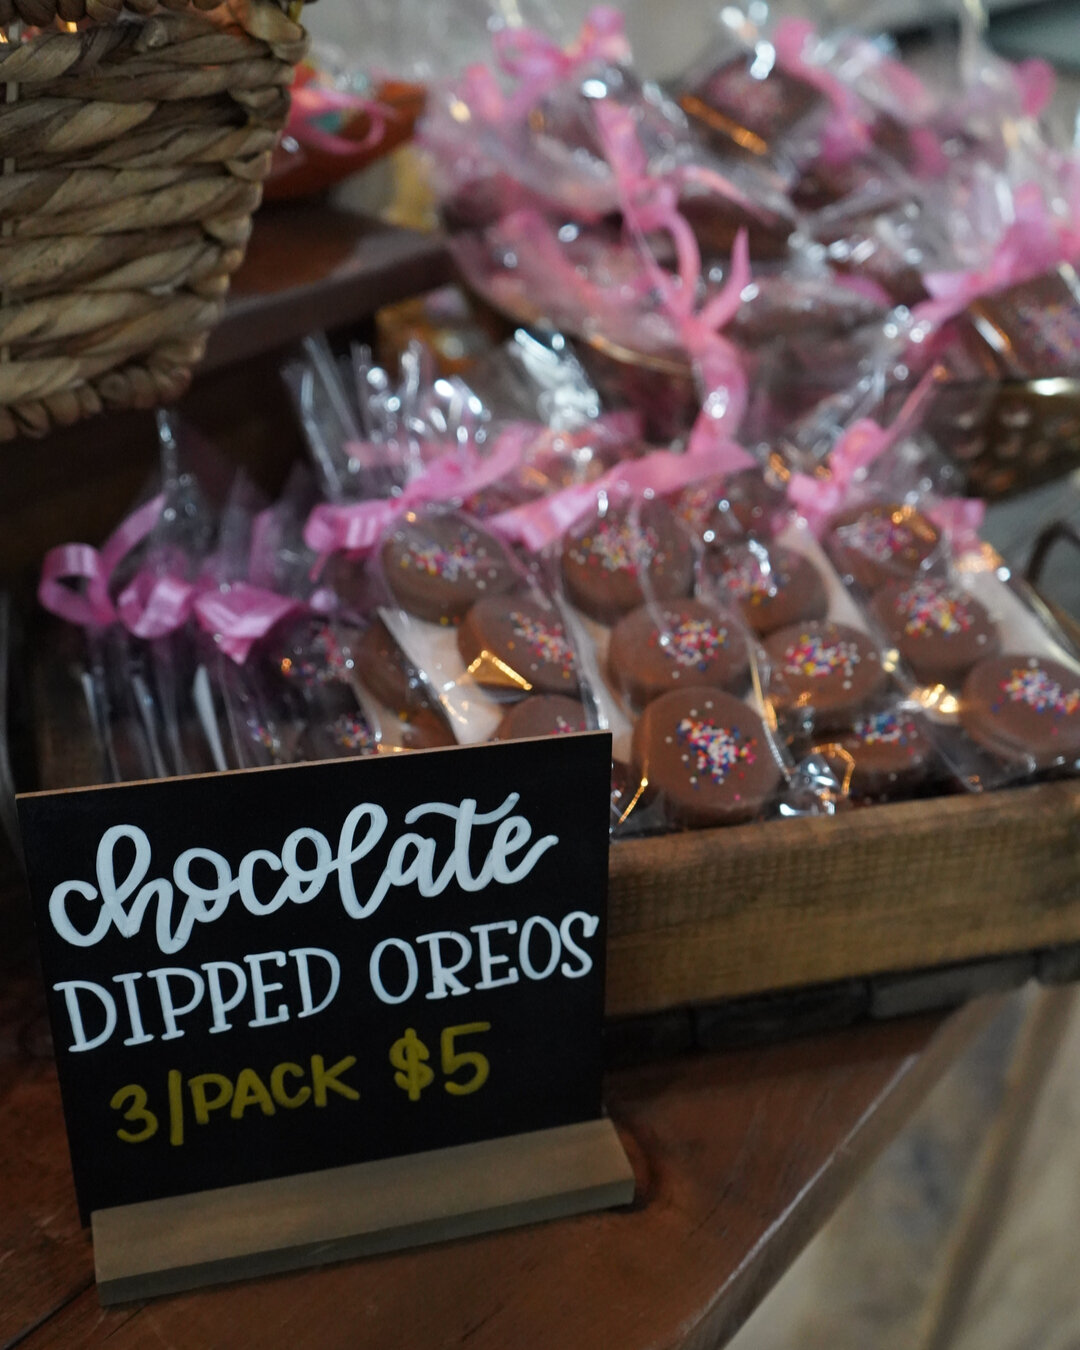 Our chocolate dipped Oreos are always a big hit! Come find out why for yourself 🤎​​​​​​​​
​​​​​​​​
📲Click the link in our bio to shop and make sure you check out some of the new items on our site!